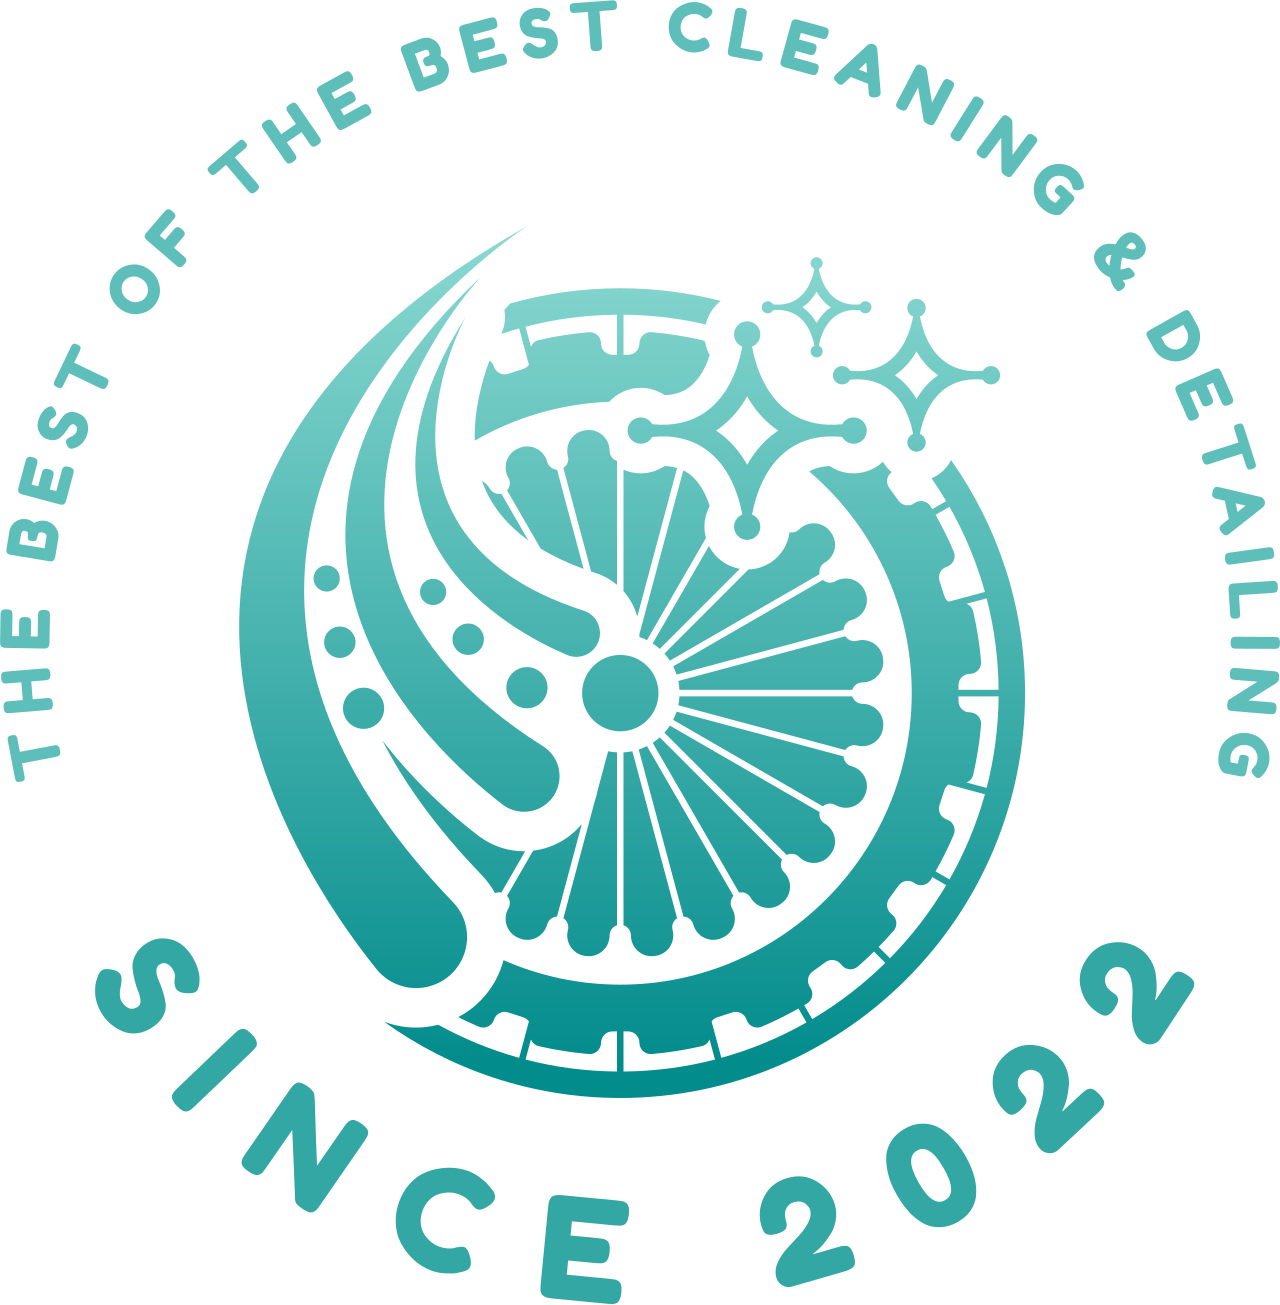 THE BEST OF THE BEST CLEANING & DETAILING's logo